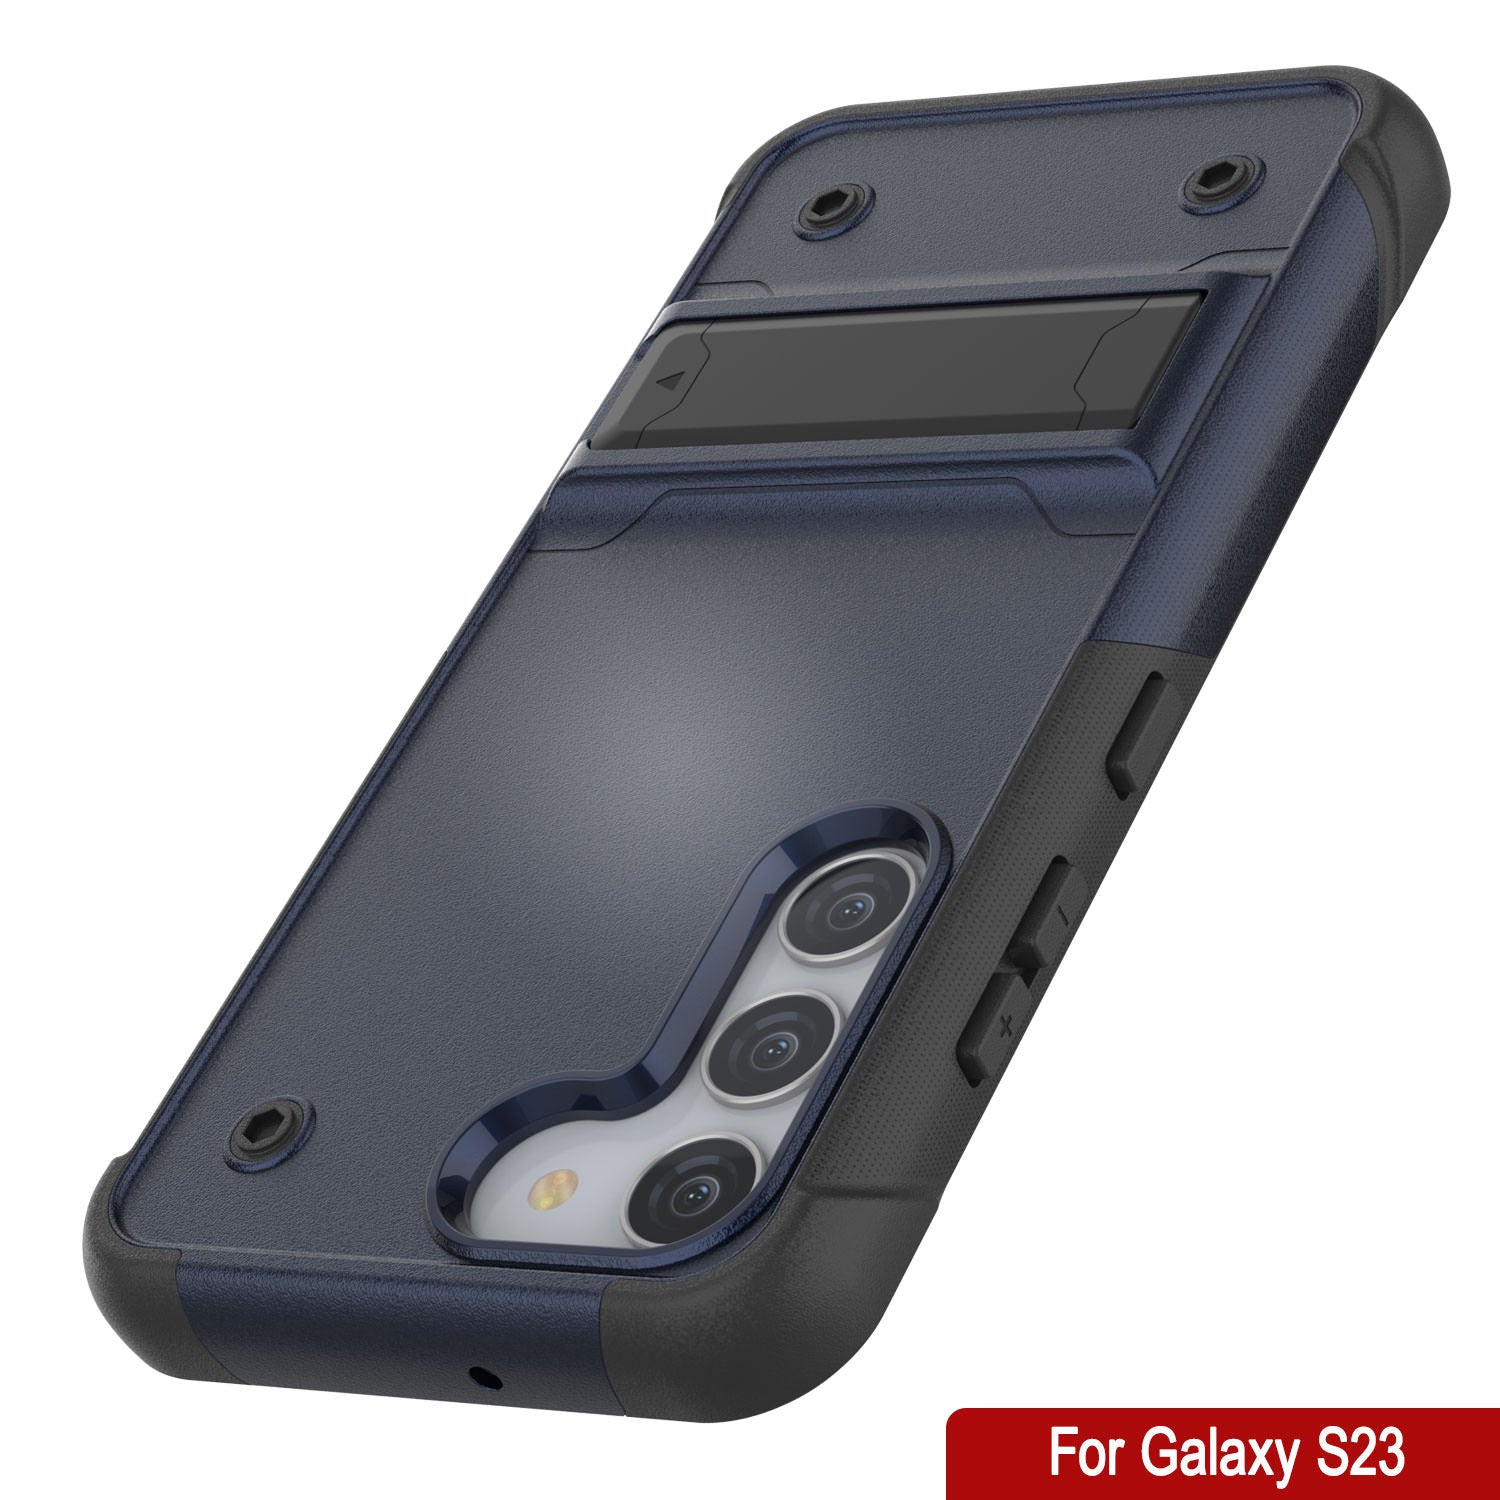 Punkcase Galaxy S23 Case [Reliance Series] Protective Hybrid Military Grade Cover W/Built-in Kickstand [Navy-Black]